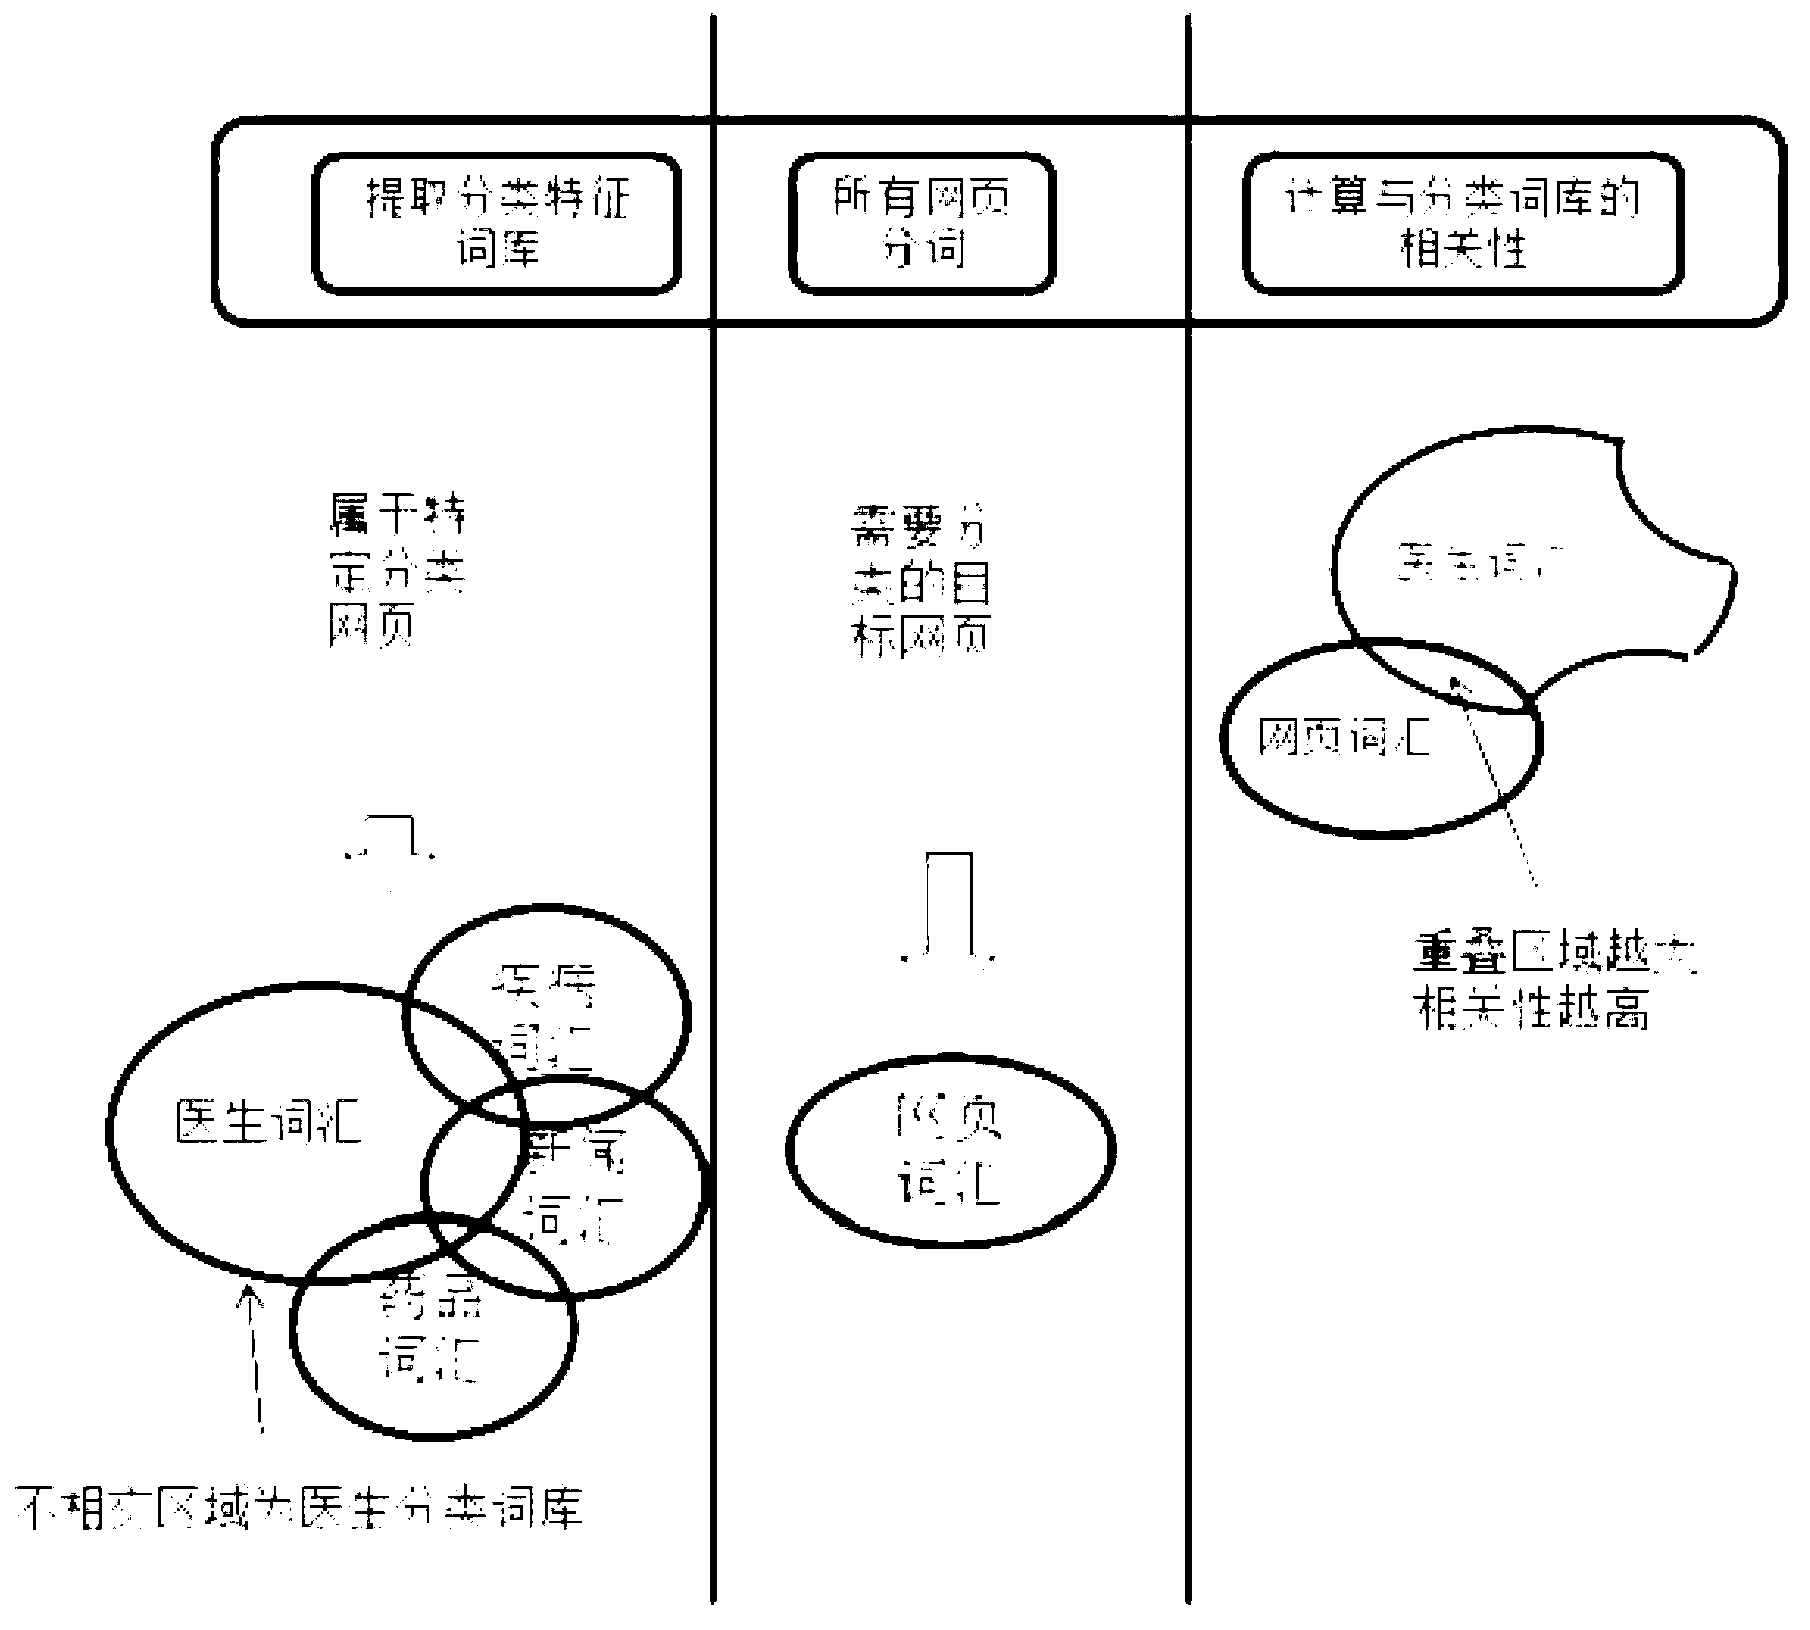 Method for identifying websites and finely classifying web pages in medical field